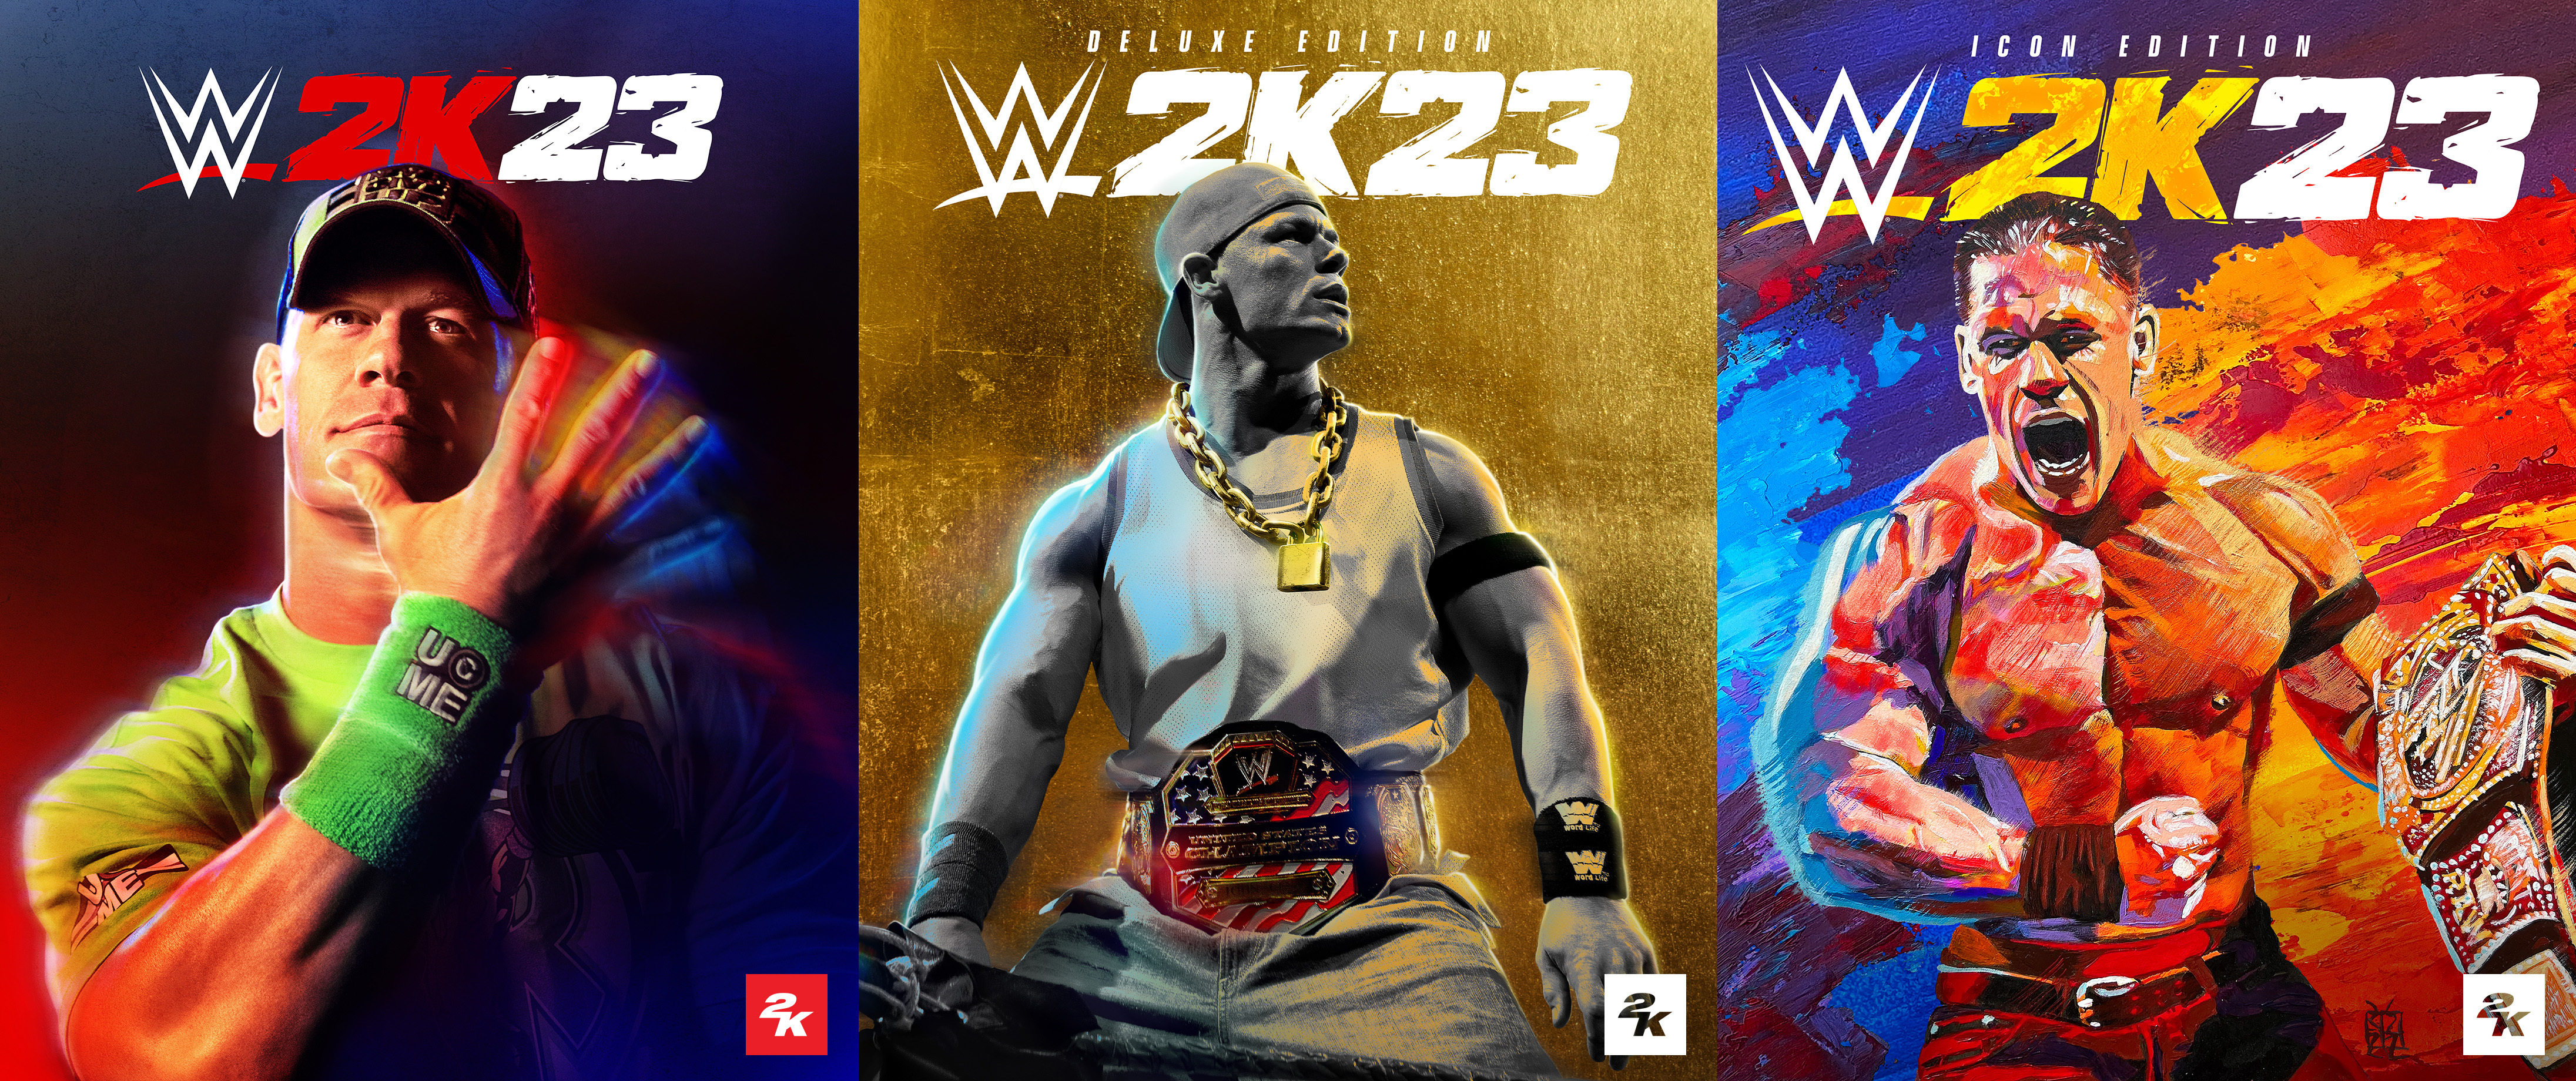 John Cena appears on the cover of WWE 2K23.